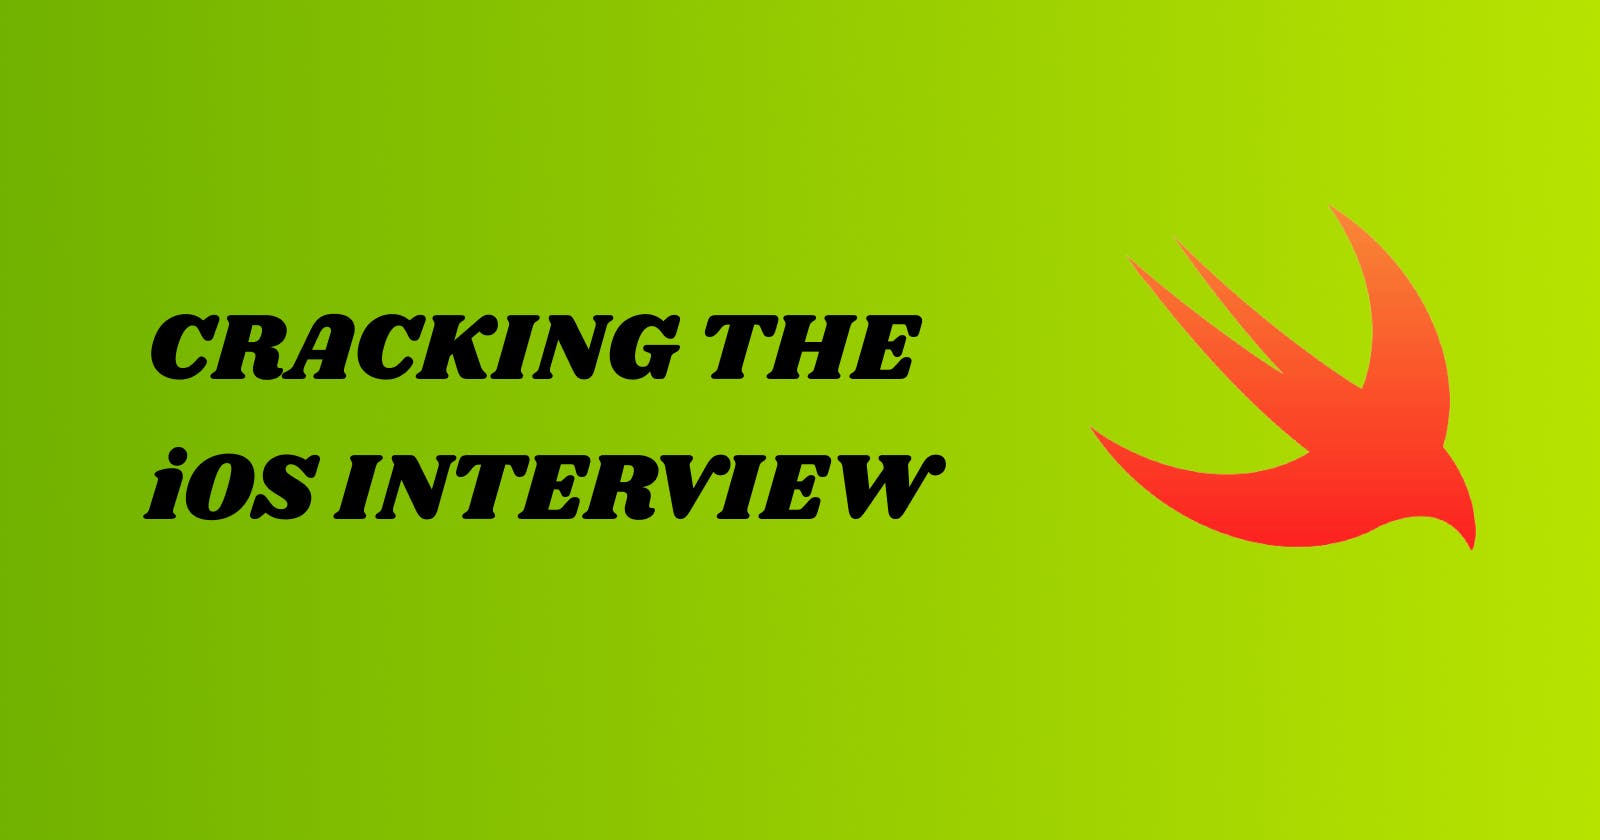 Cracking the iOS Interview: Array Questions #2 - Check Permutation